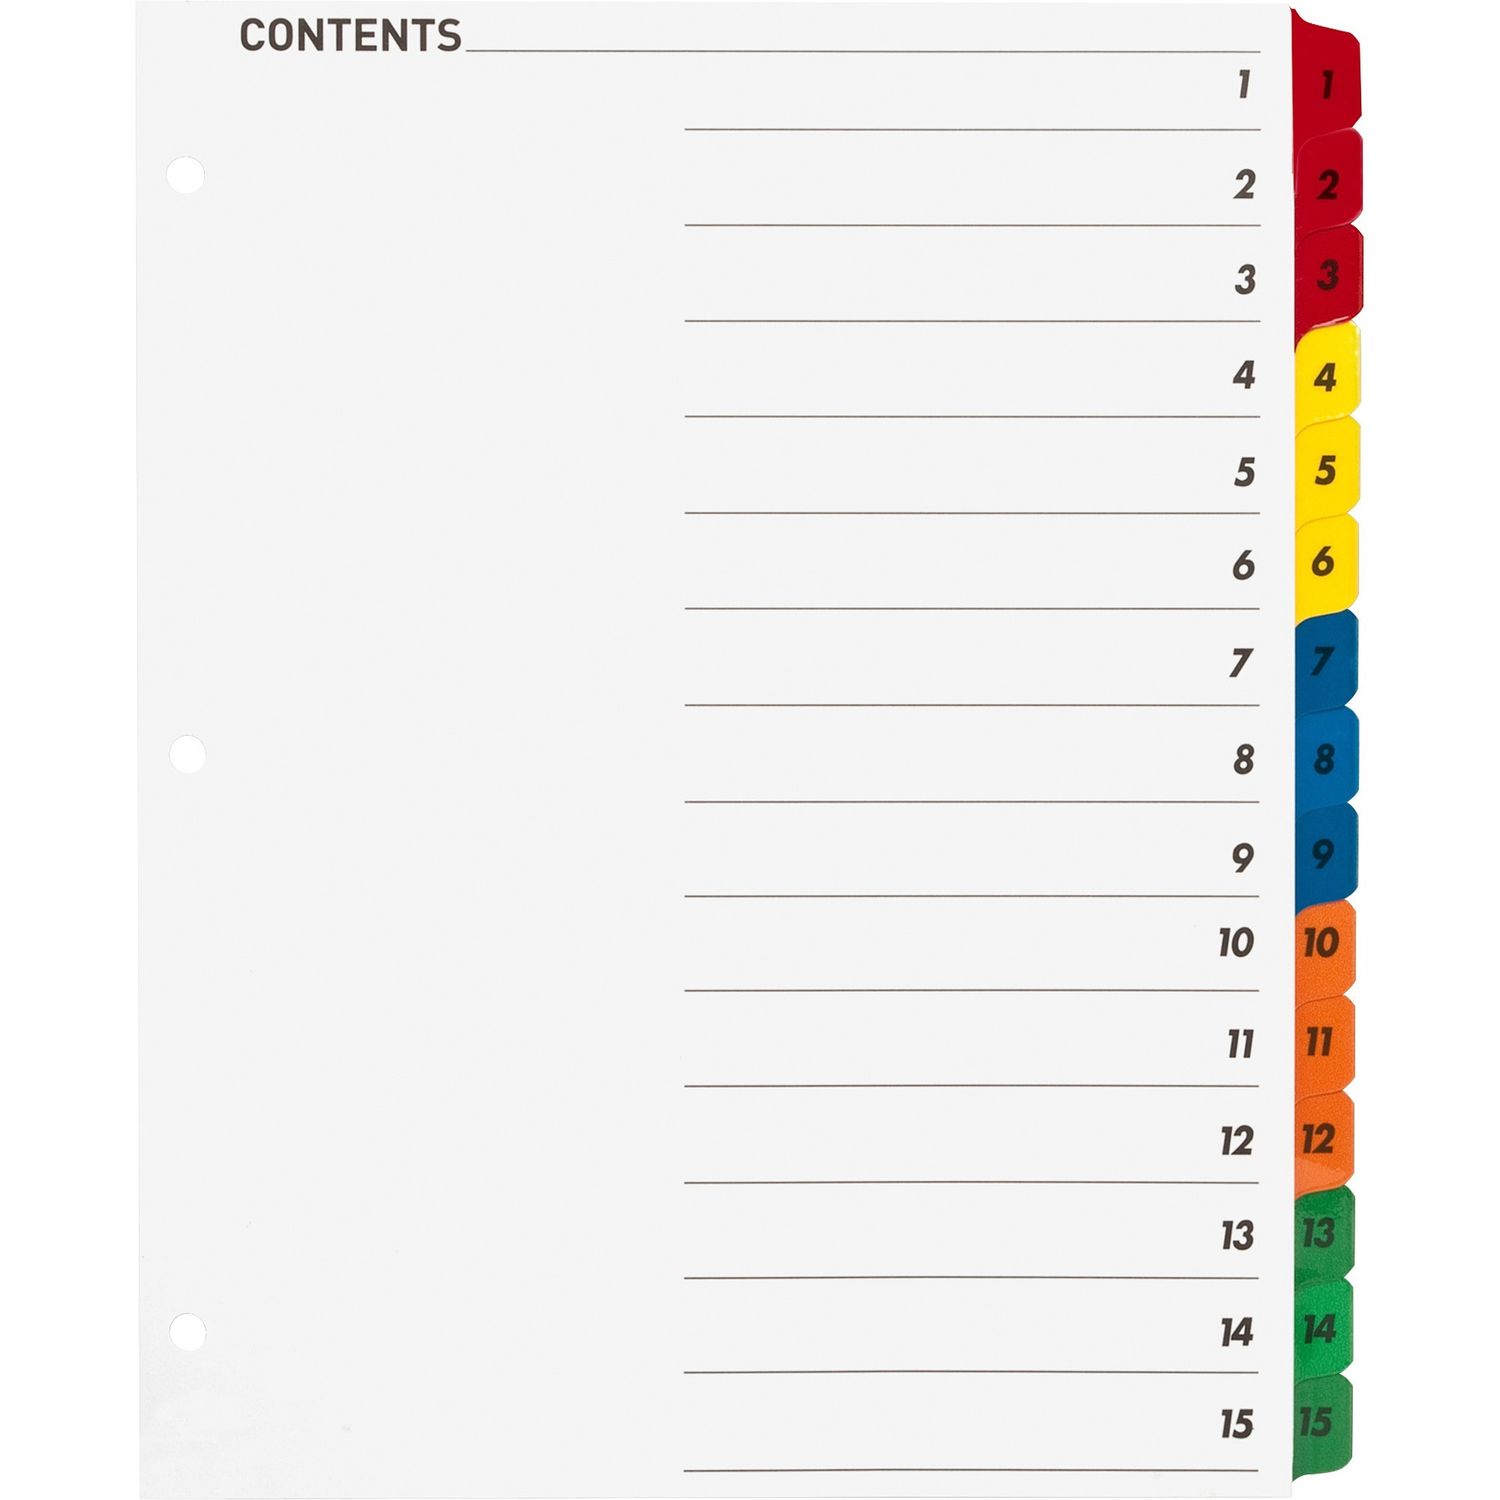 Table of Content Quick Index Dividers Printed Tab(s), Digit, 1-15, 15 Tab(s)/Set, 8.5" Divider Width x 11" Divider Length, 3 Hole Punched, Multicolor Divider, Multicolor Mylar Tab(s), 15 / Set